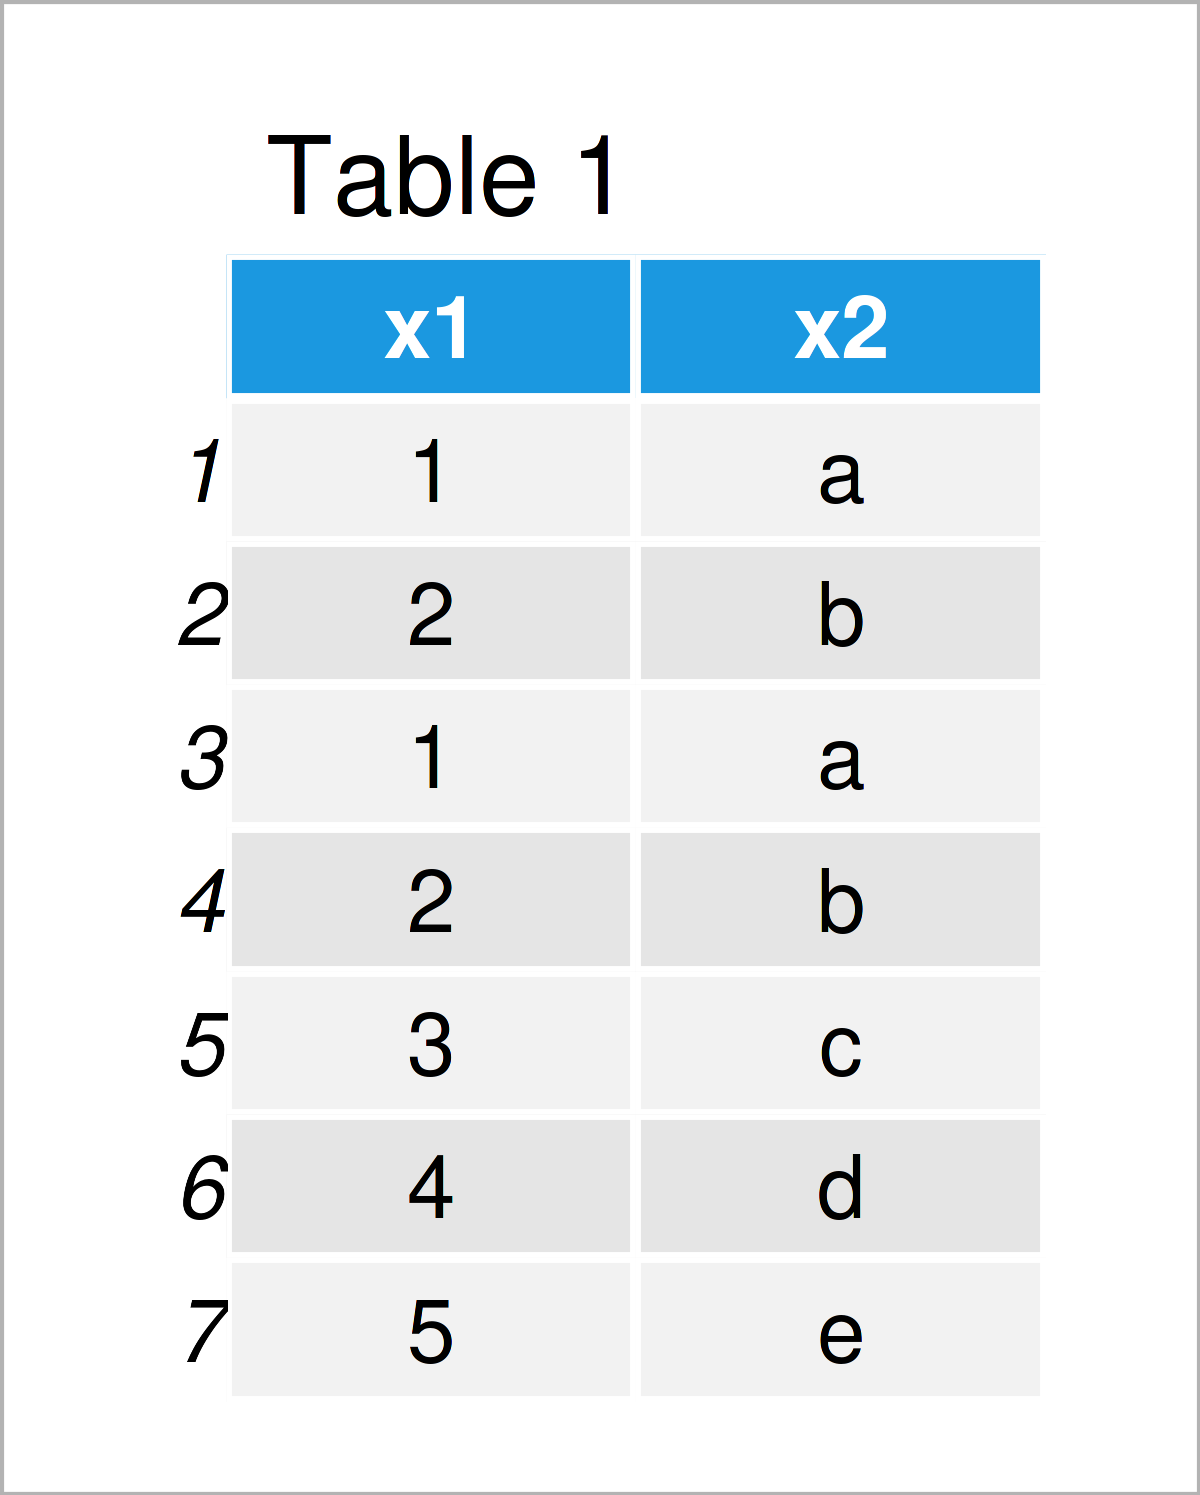 table 1 duplicated function